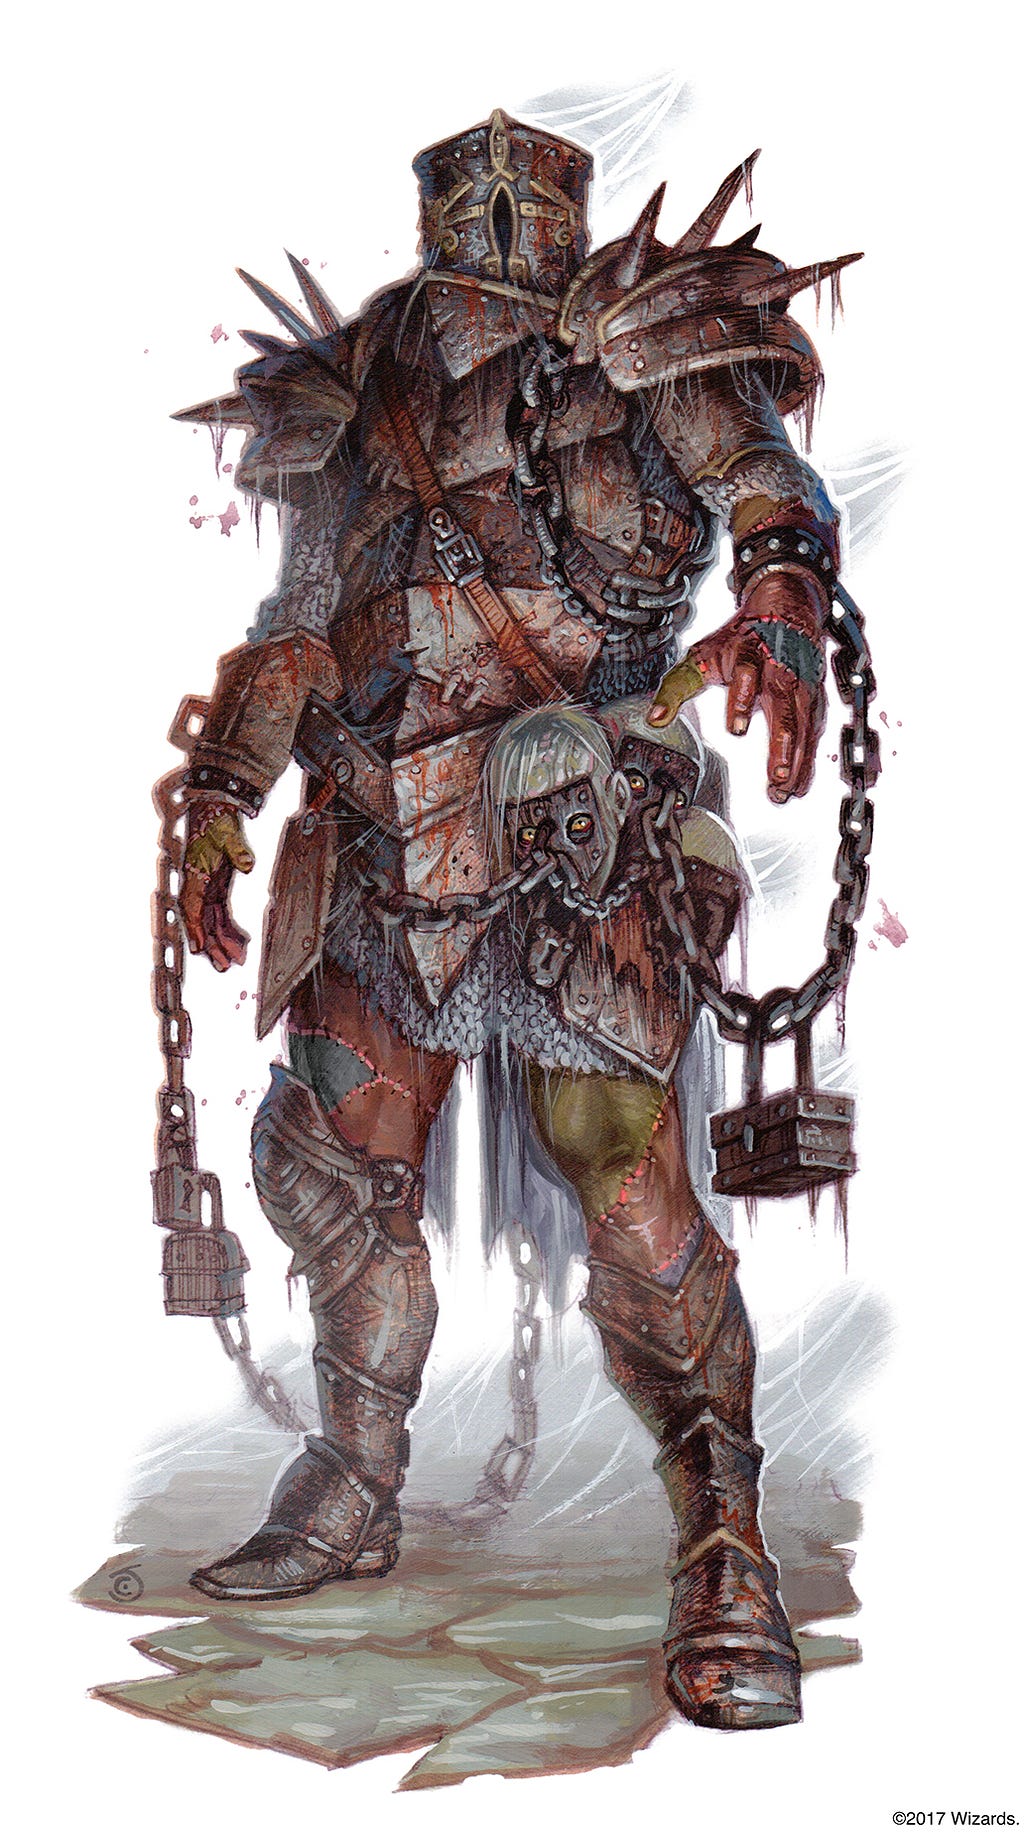 A tomb guardian clad in iron armor with chains and blood surrounding it.